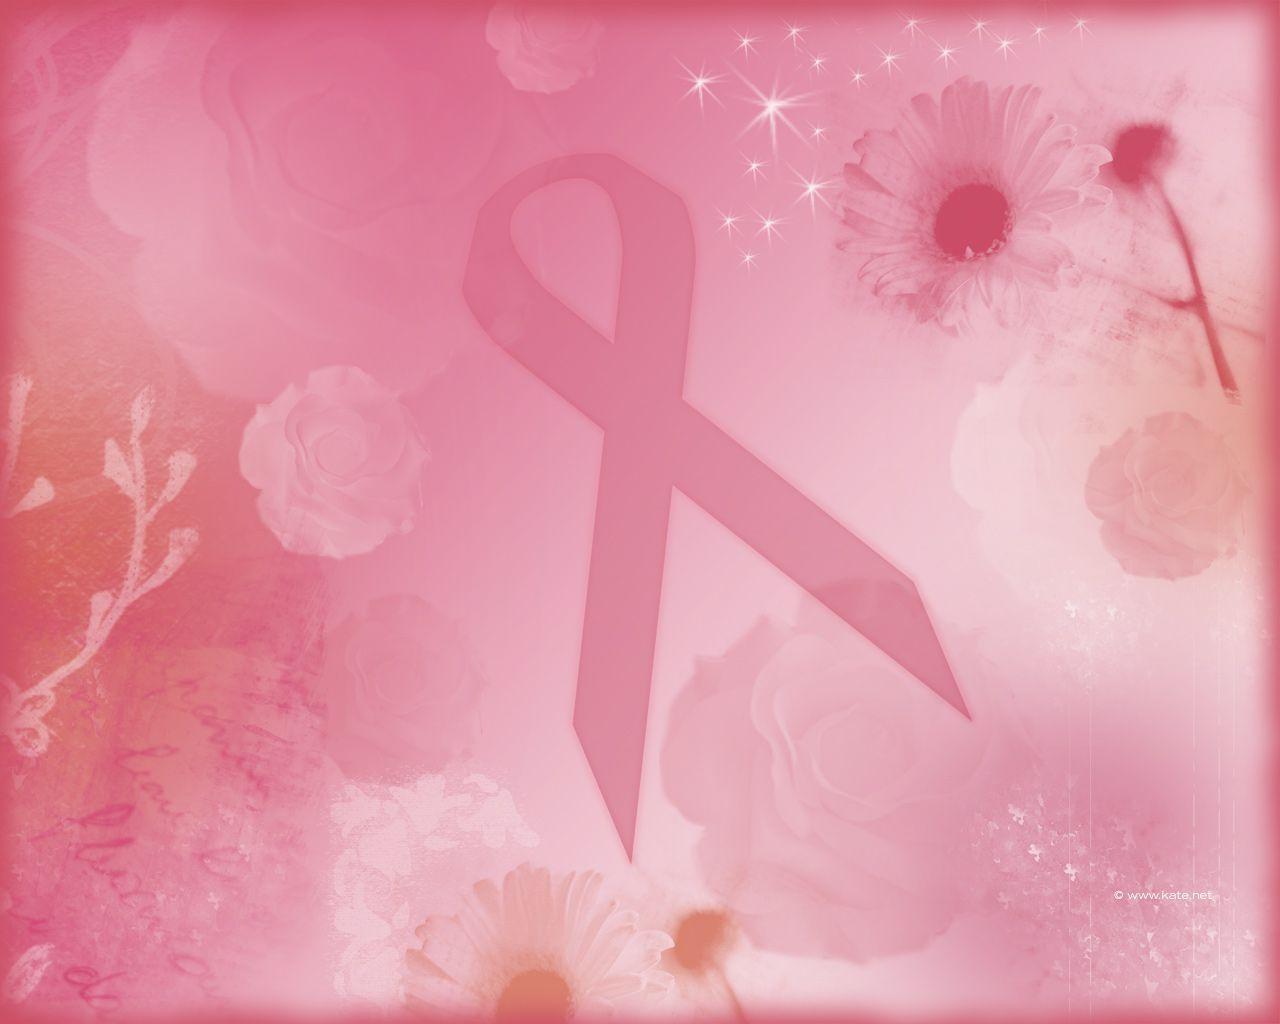 Breast Cancer Awareness Wallpaper by Kate.net